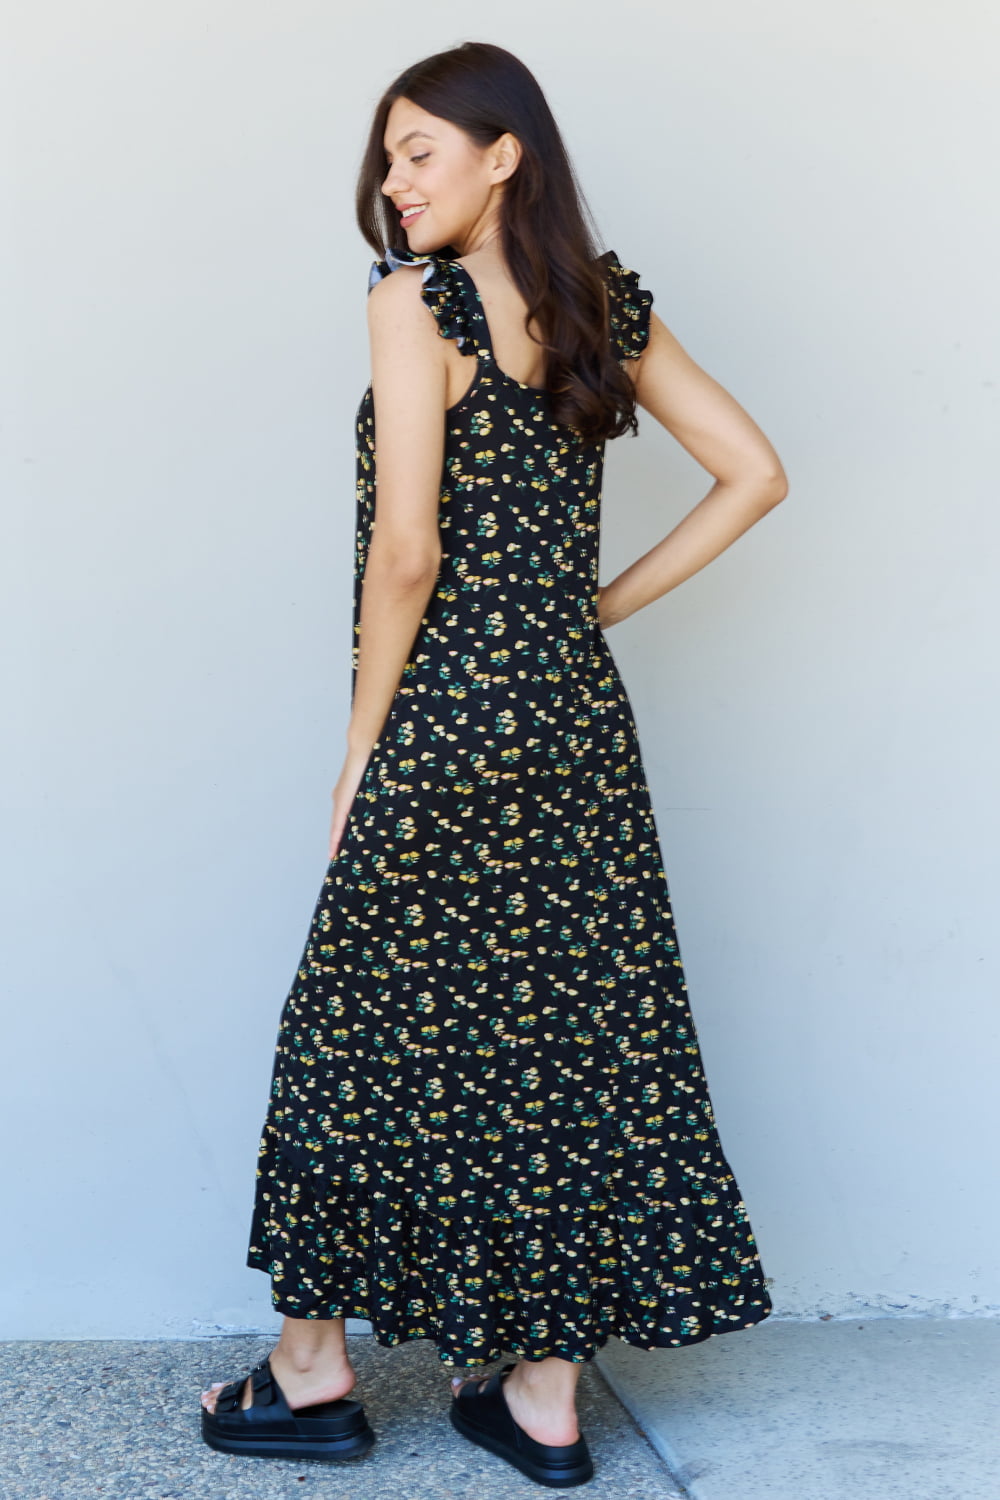 Doublju In The Garden Ruffle Floral Maxi Dress in  Black Yellow Floral  | KIKI COUTURE